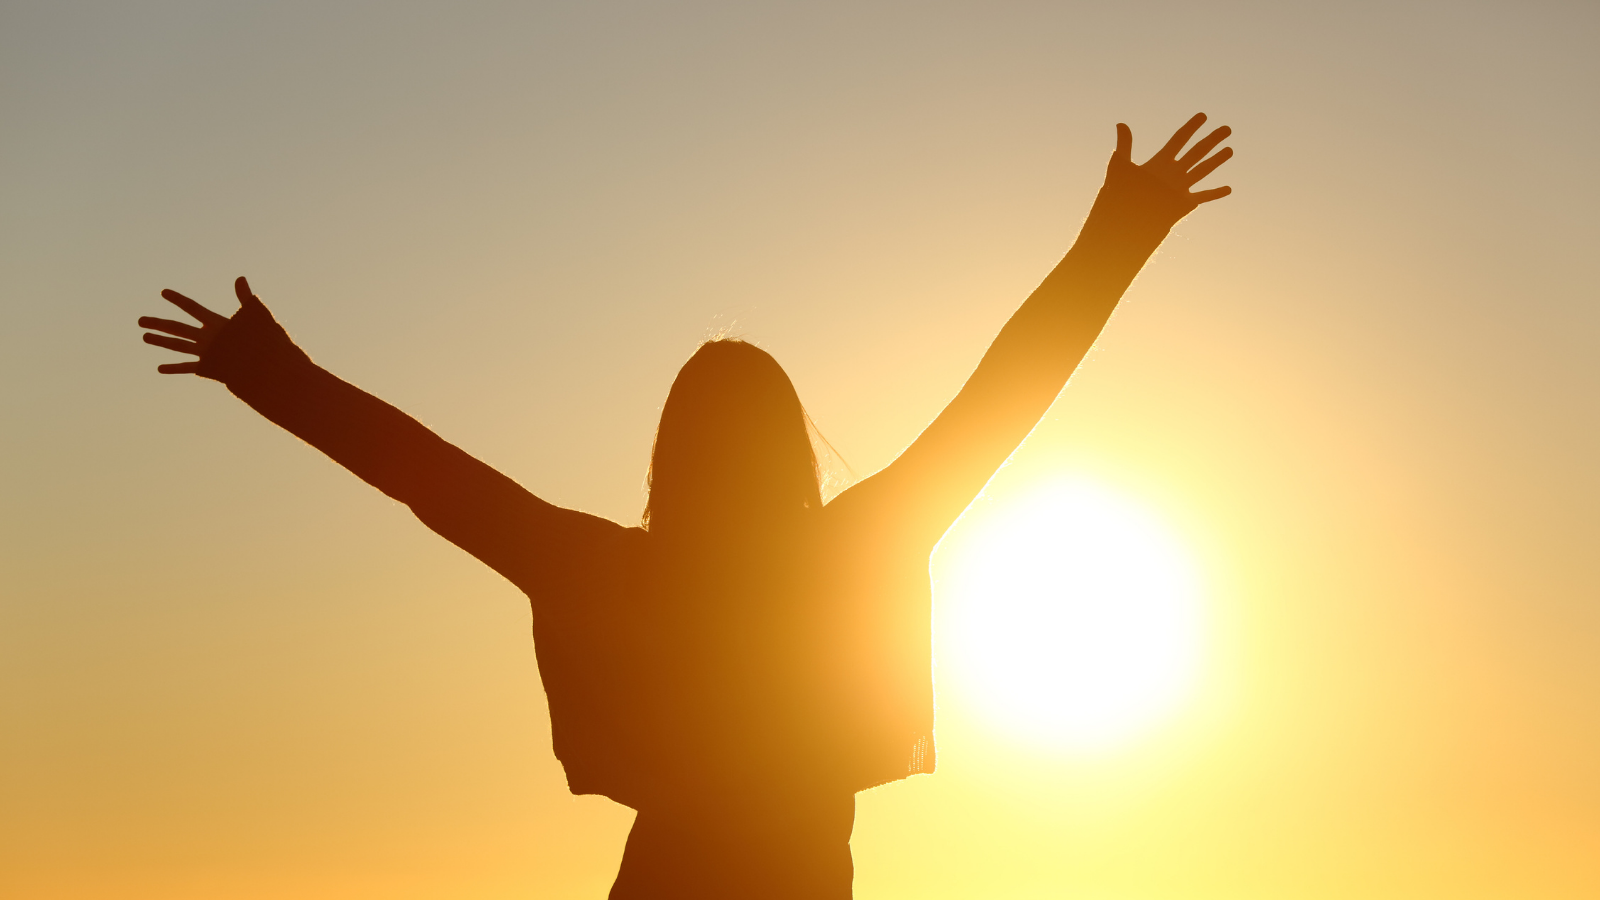 Image of a girl with hands in the air facing the sun.